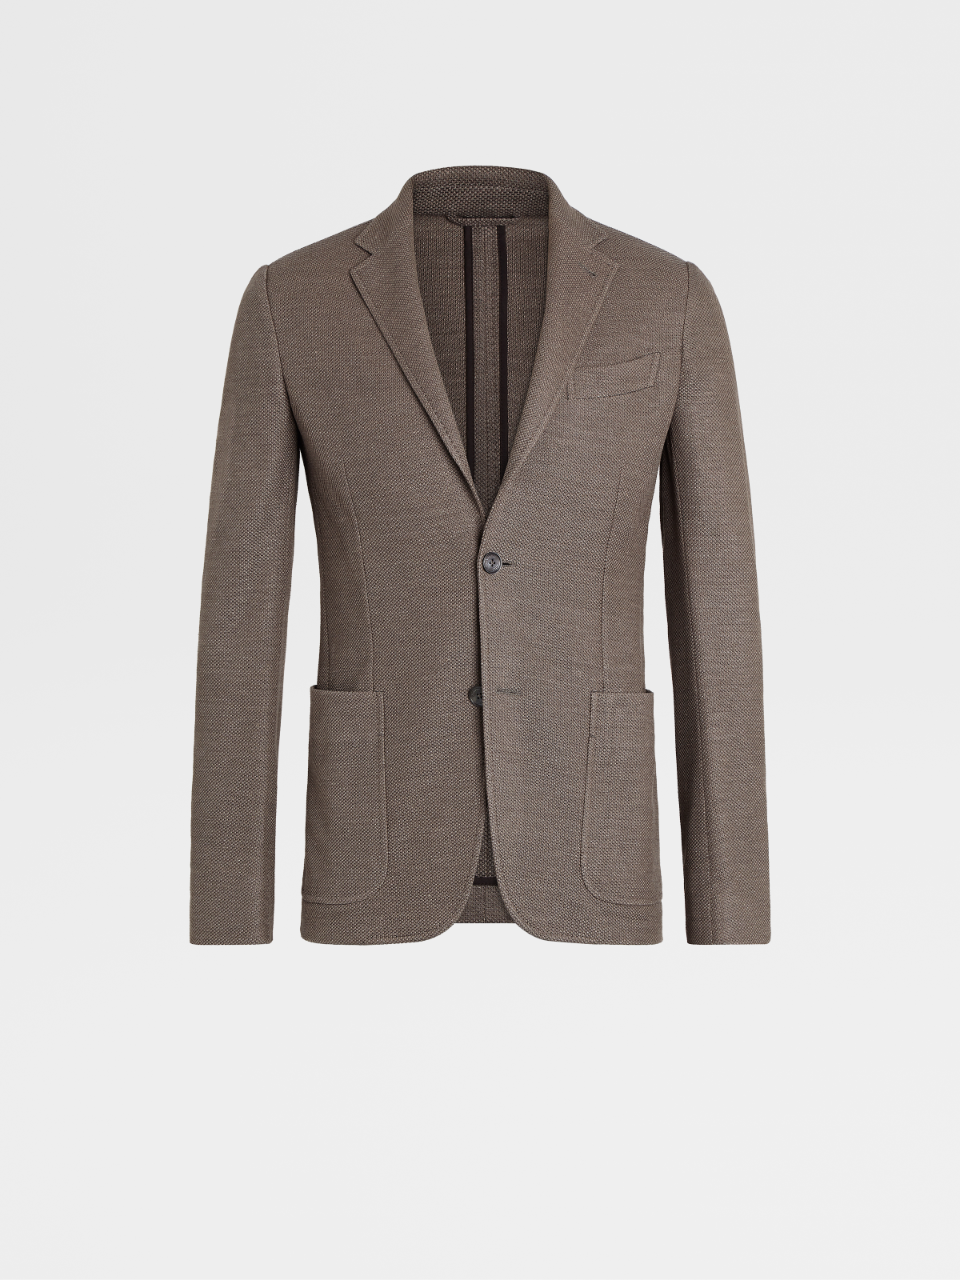 Brown Silk Linen and Wool Crossover Jersey Shirt Jacket, Slim Fit